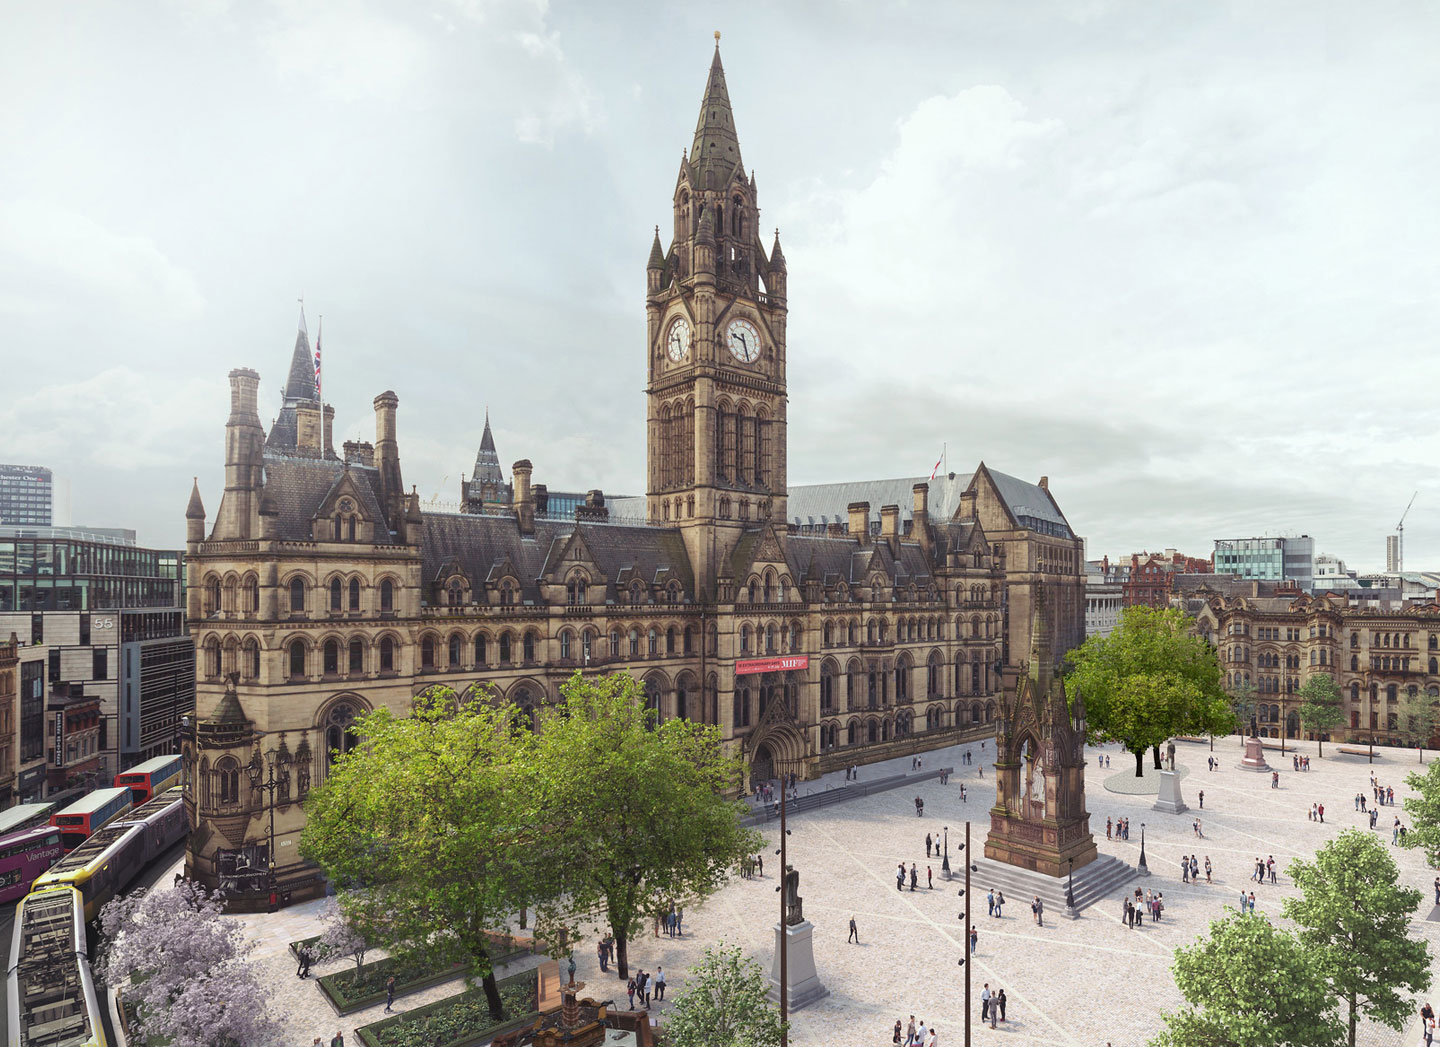 Exterior view of Manchester Town Hall across St Peters Square